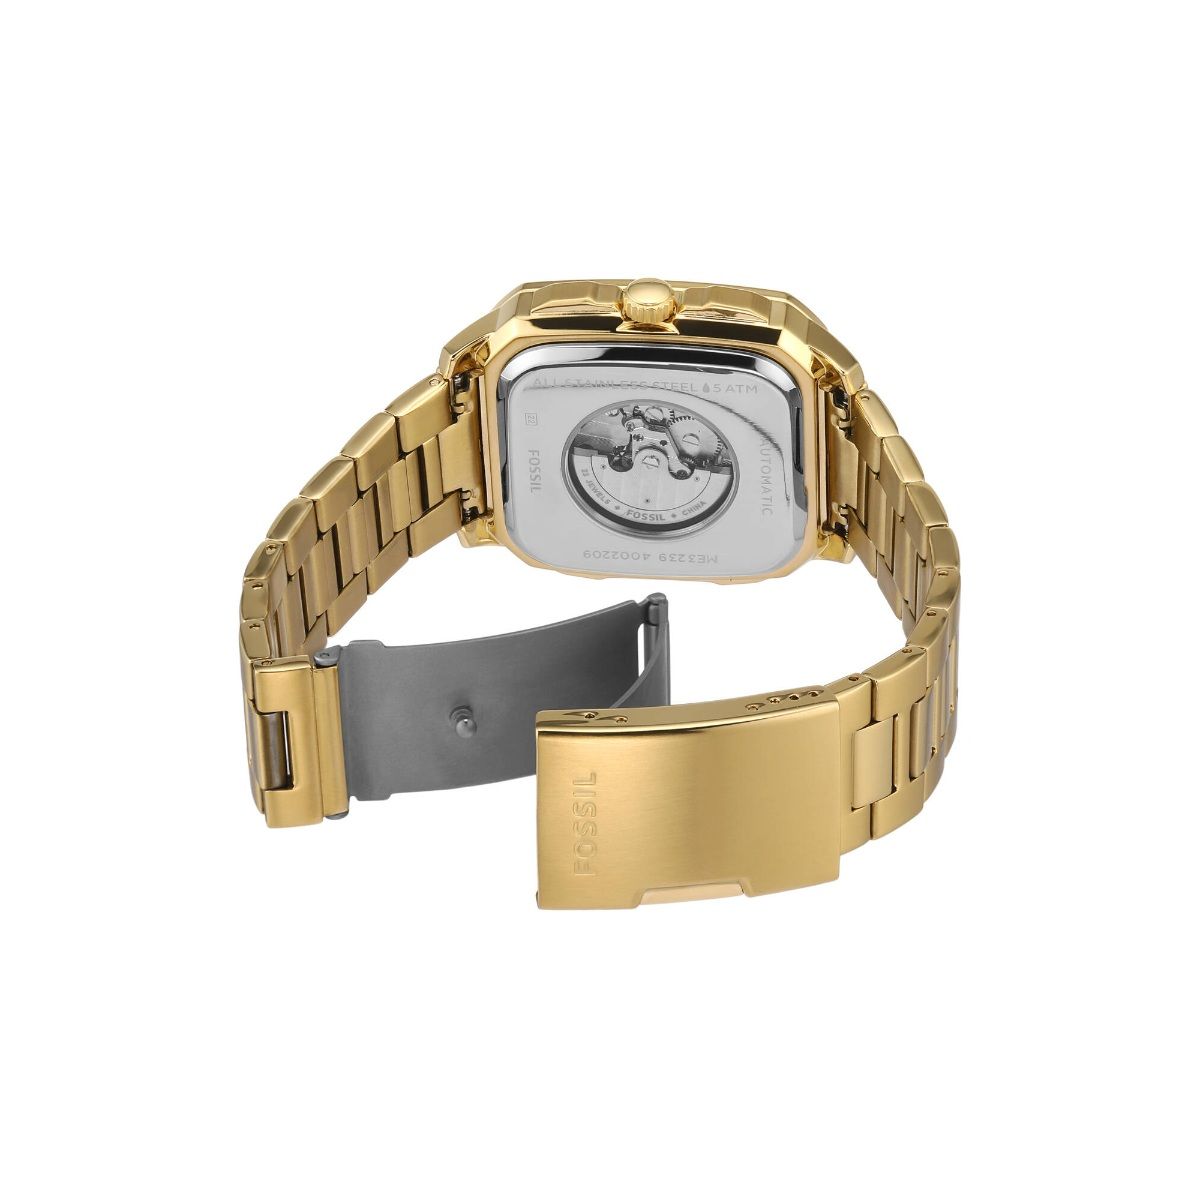 Fossil Inscription Gold Watch ME3239: Buy Fossil Inscription Gold